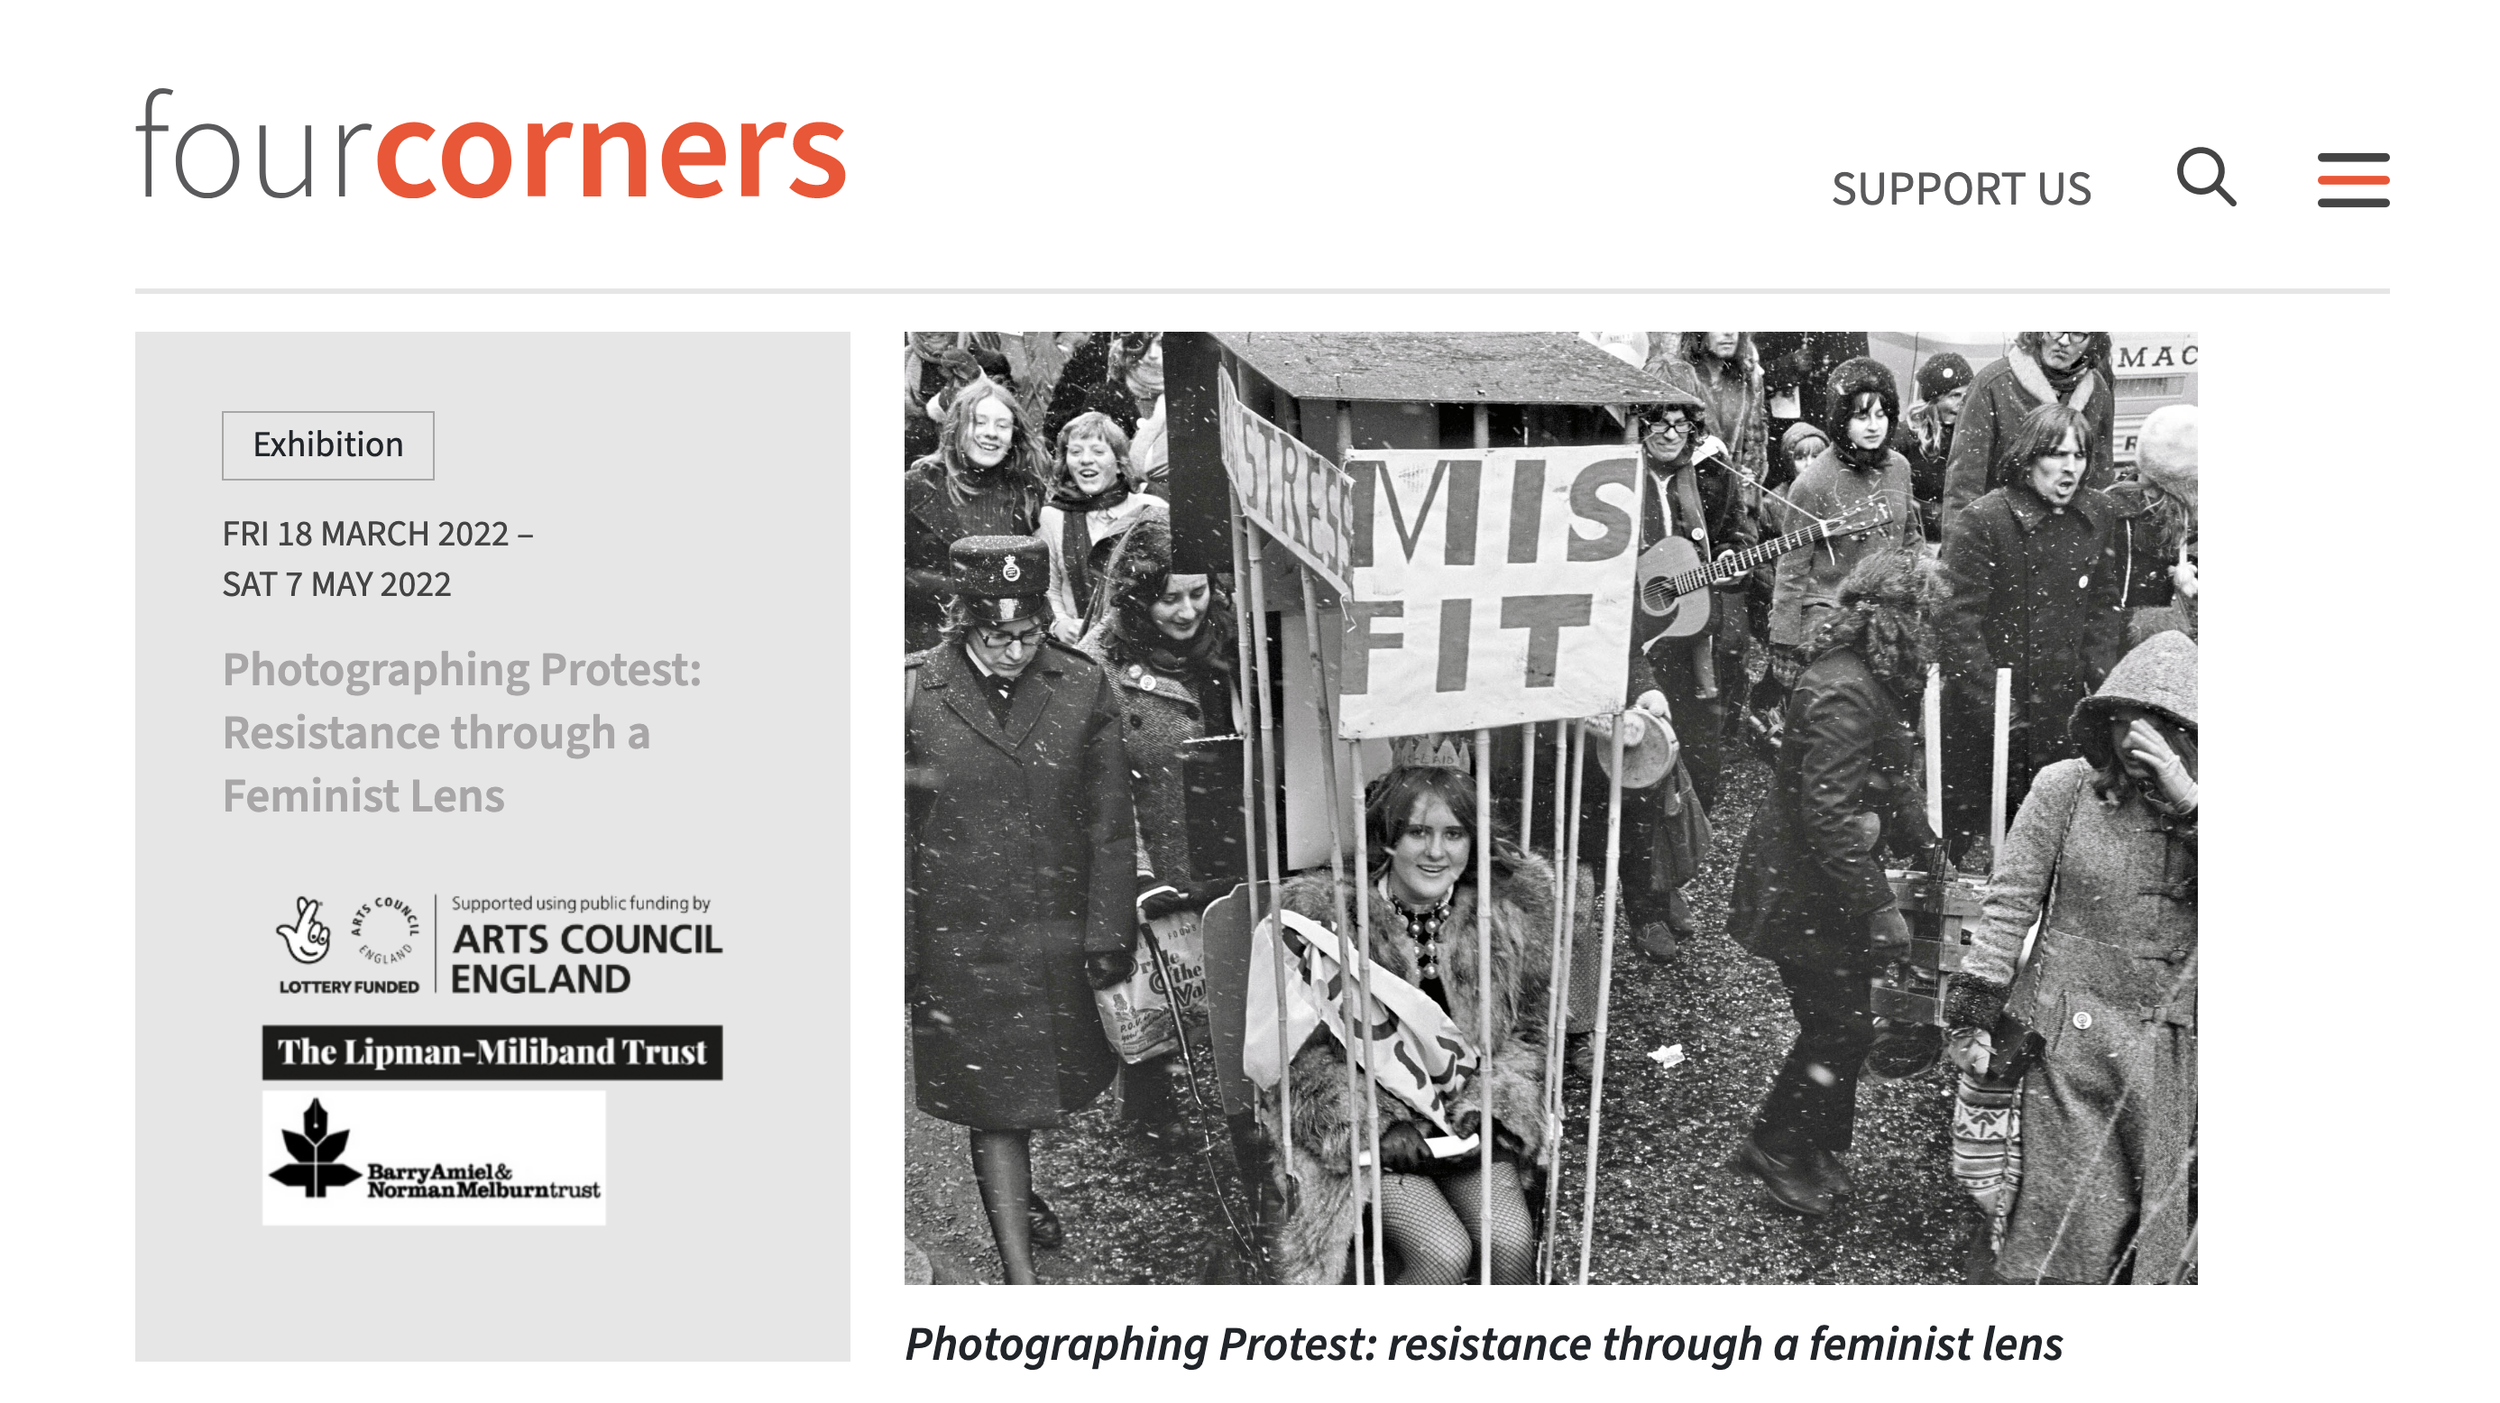 Photographing Protest: Resistance through a feminist lens